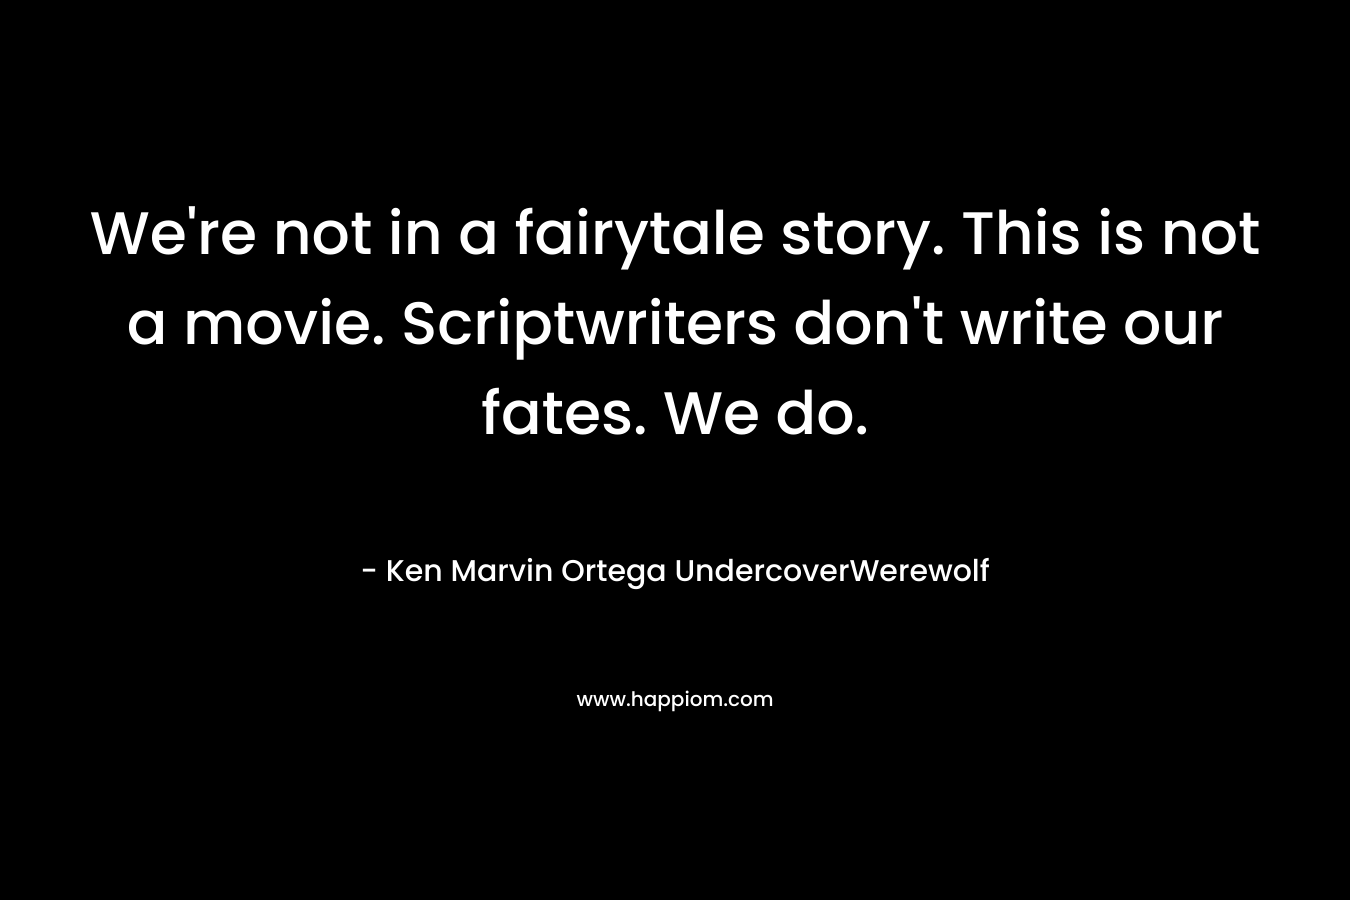 We're not in a fairytale story. This is not a movie. Scriptwriters don't write our fates. We do.